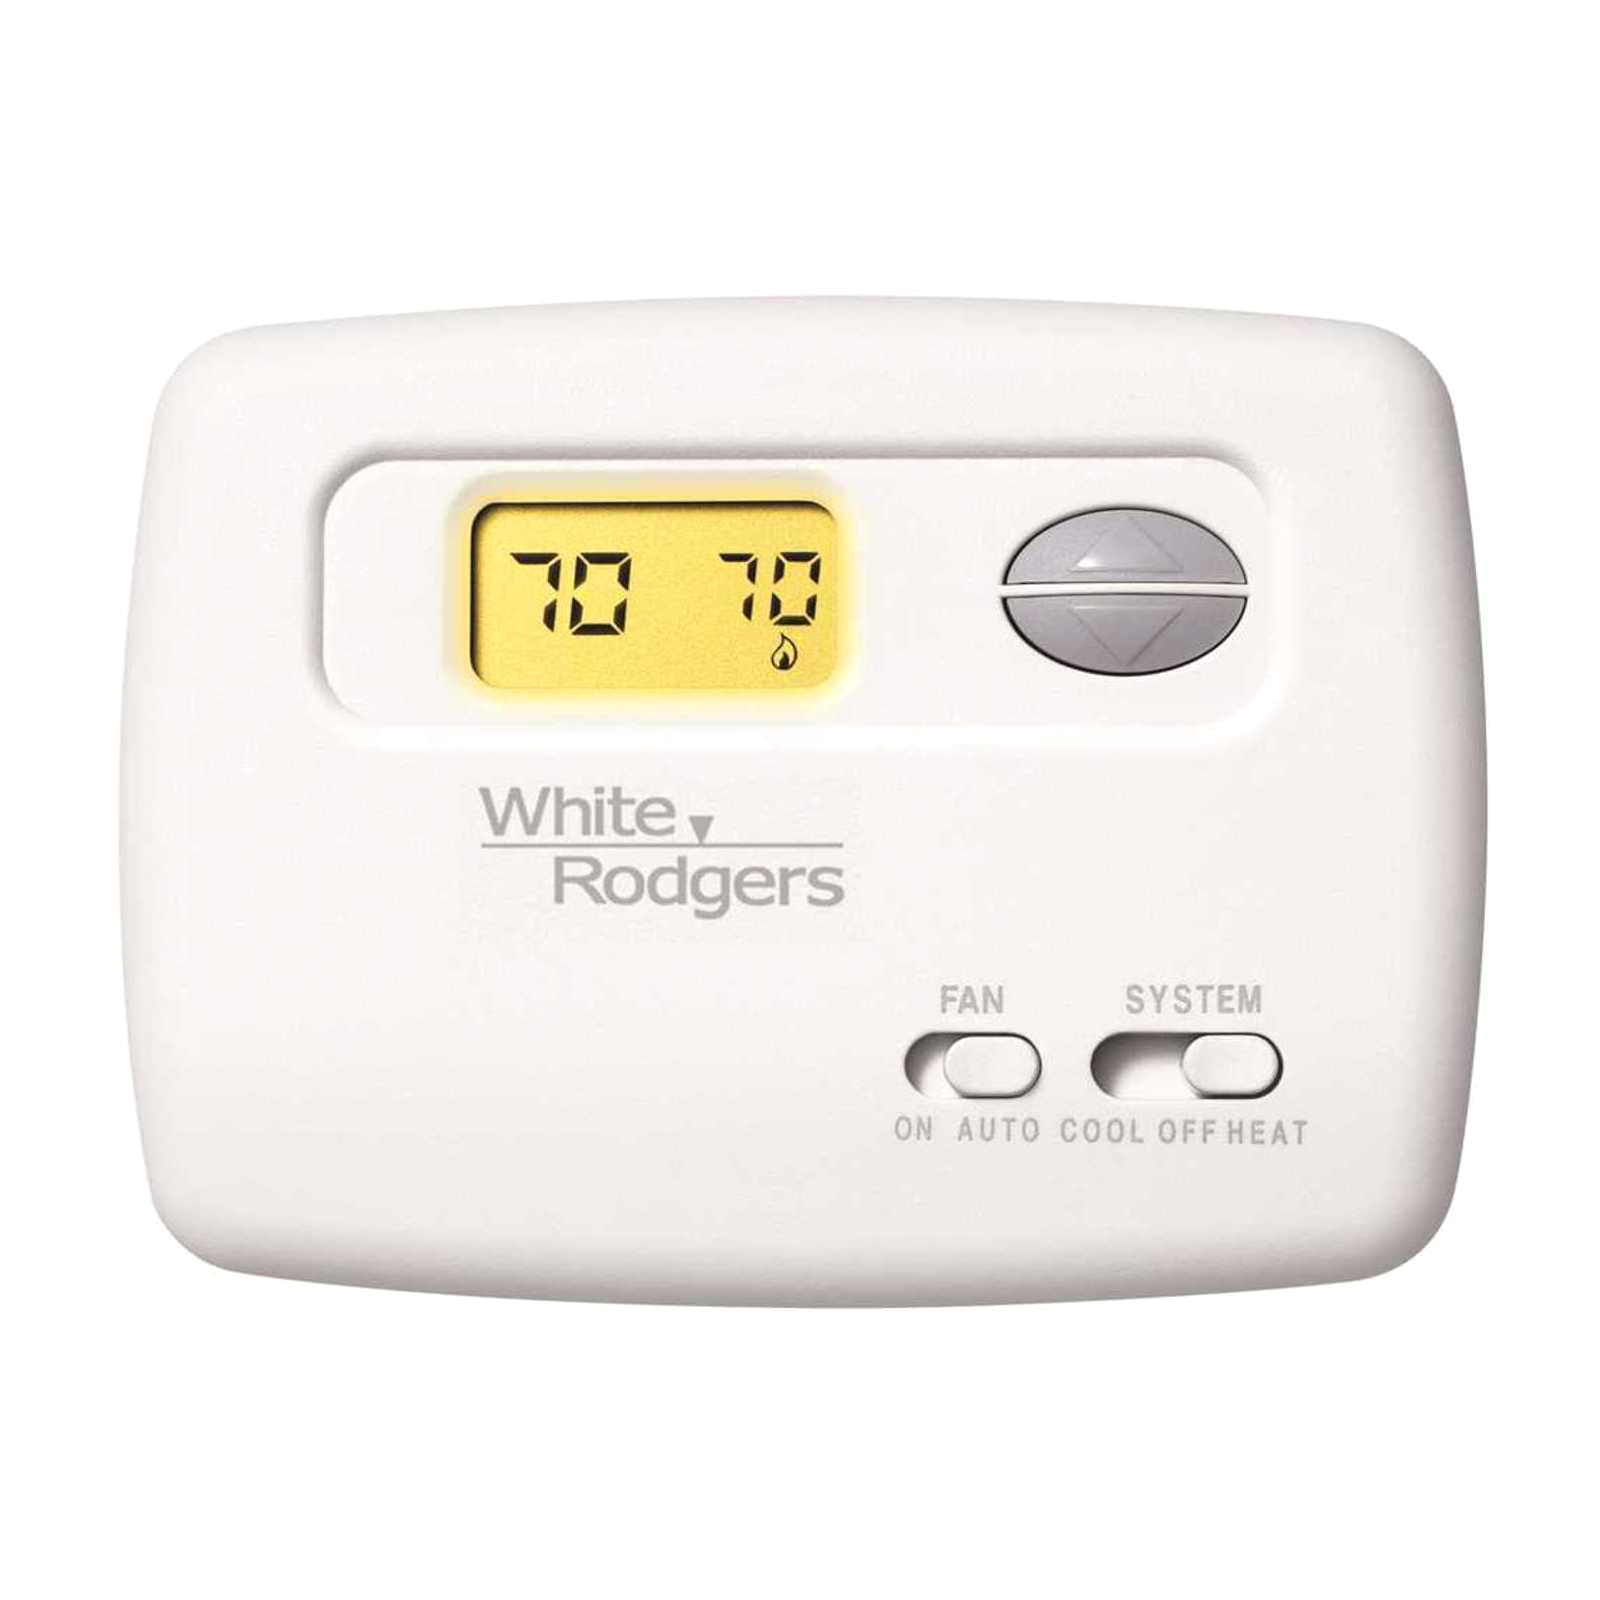 White Rodgers 1F78-144 70 Series Single Stage Non-Programmable Digital Thermostat - White